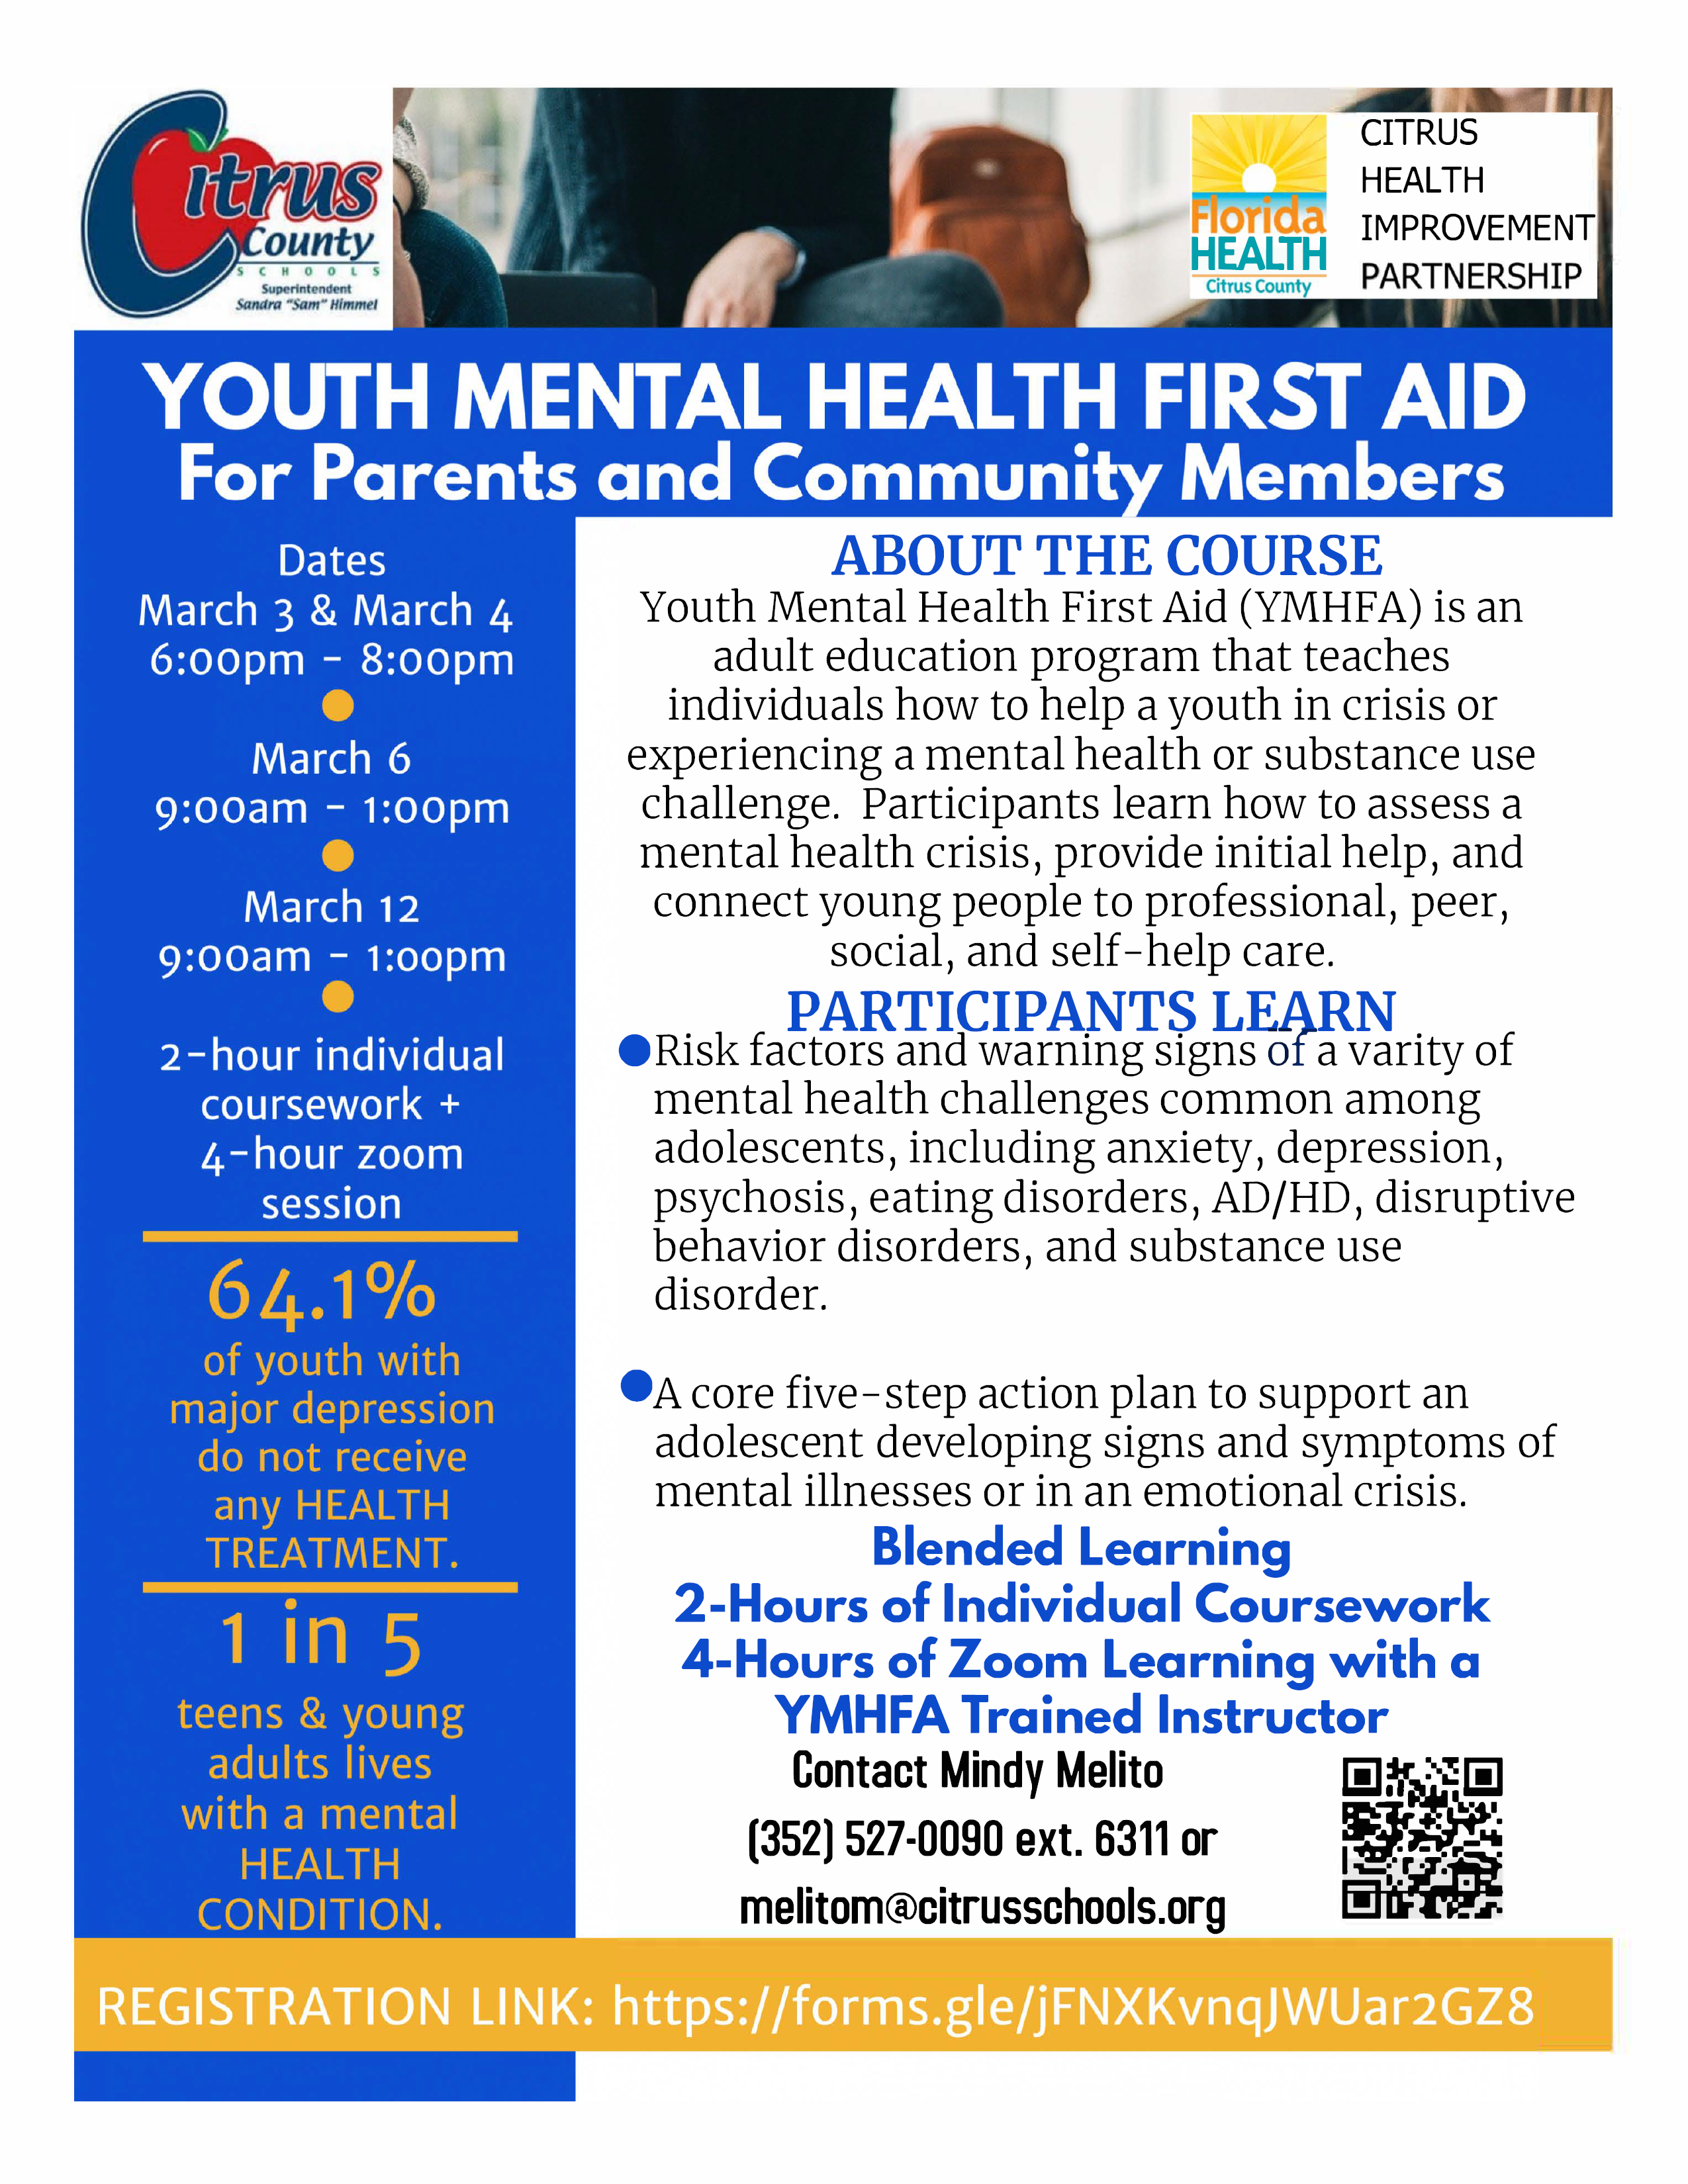 Youth Mental Health First Aid Flyer for parents and community members